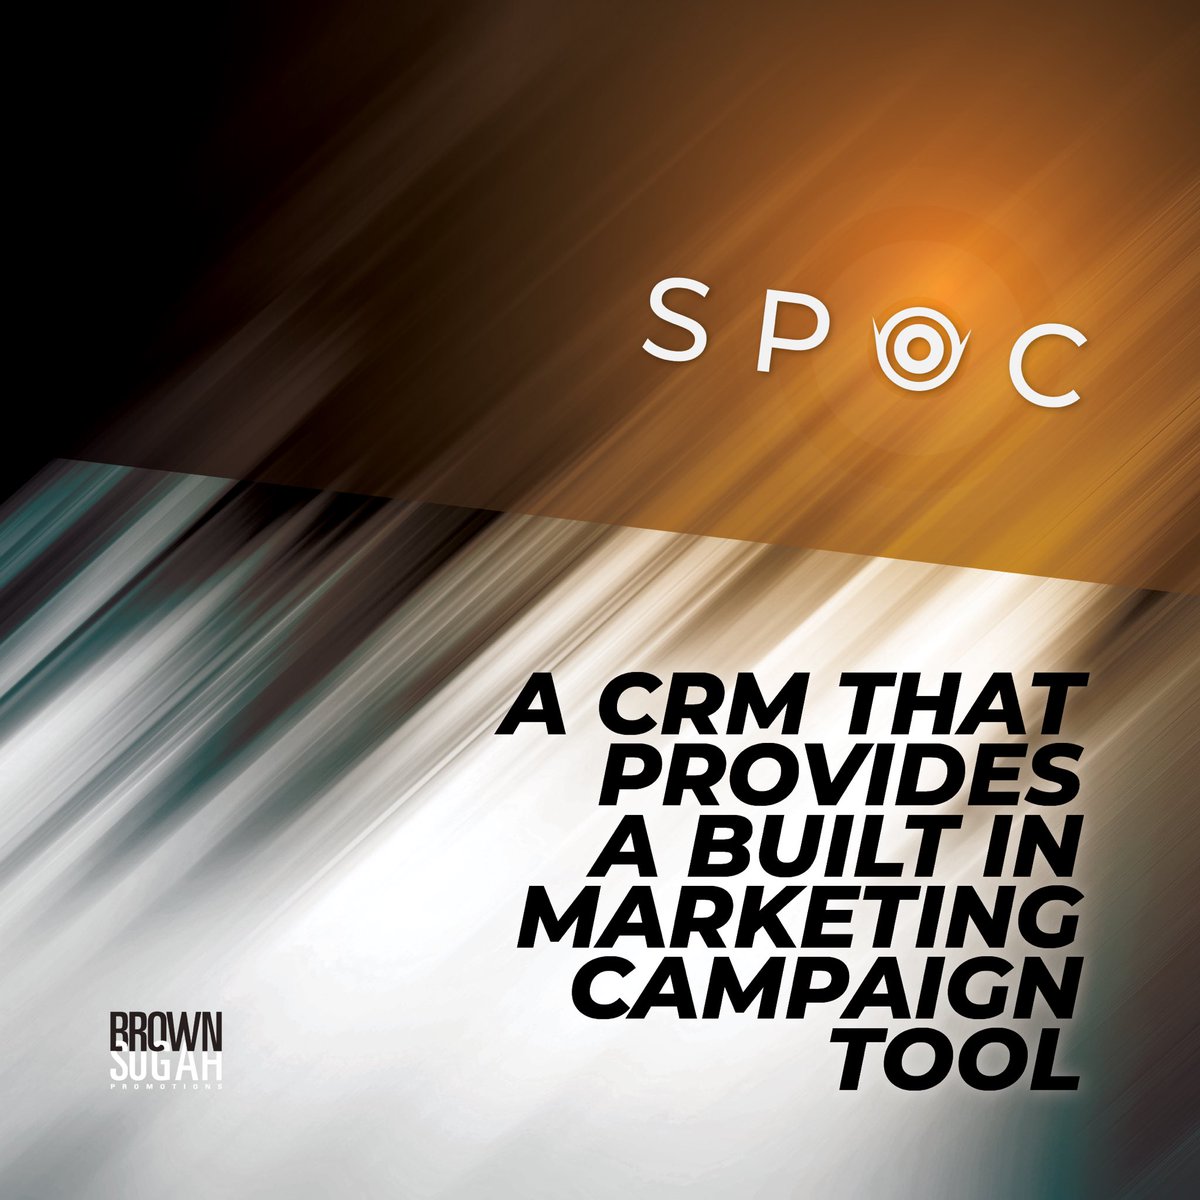 A #CRM that provides a built-in marketing campaign. If your business has a interest or questions please contact @SPOCme for more details. #DataPrivacy #marketing #NFTs